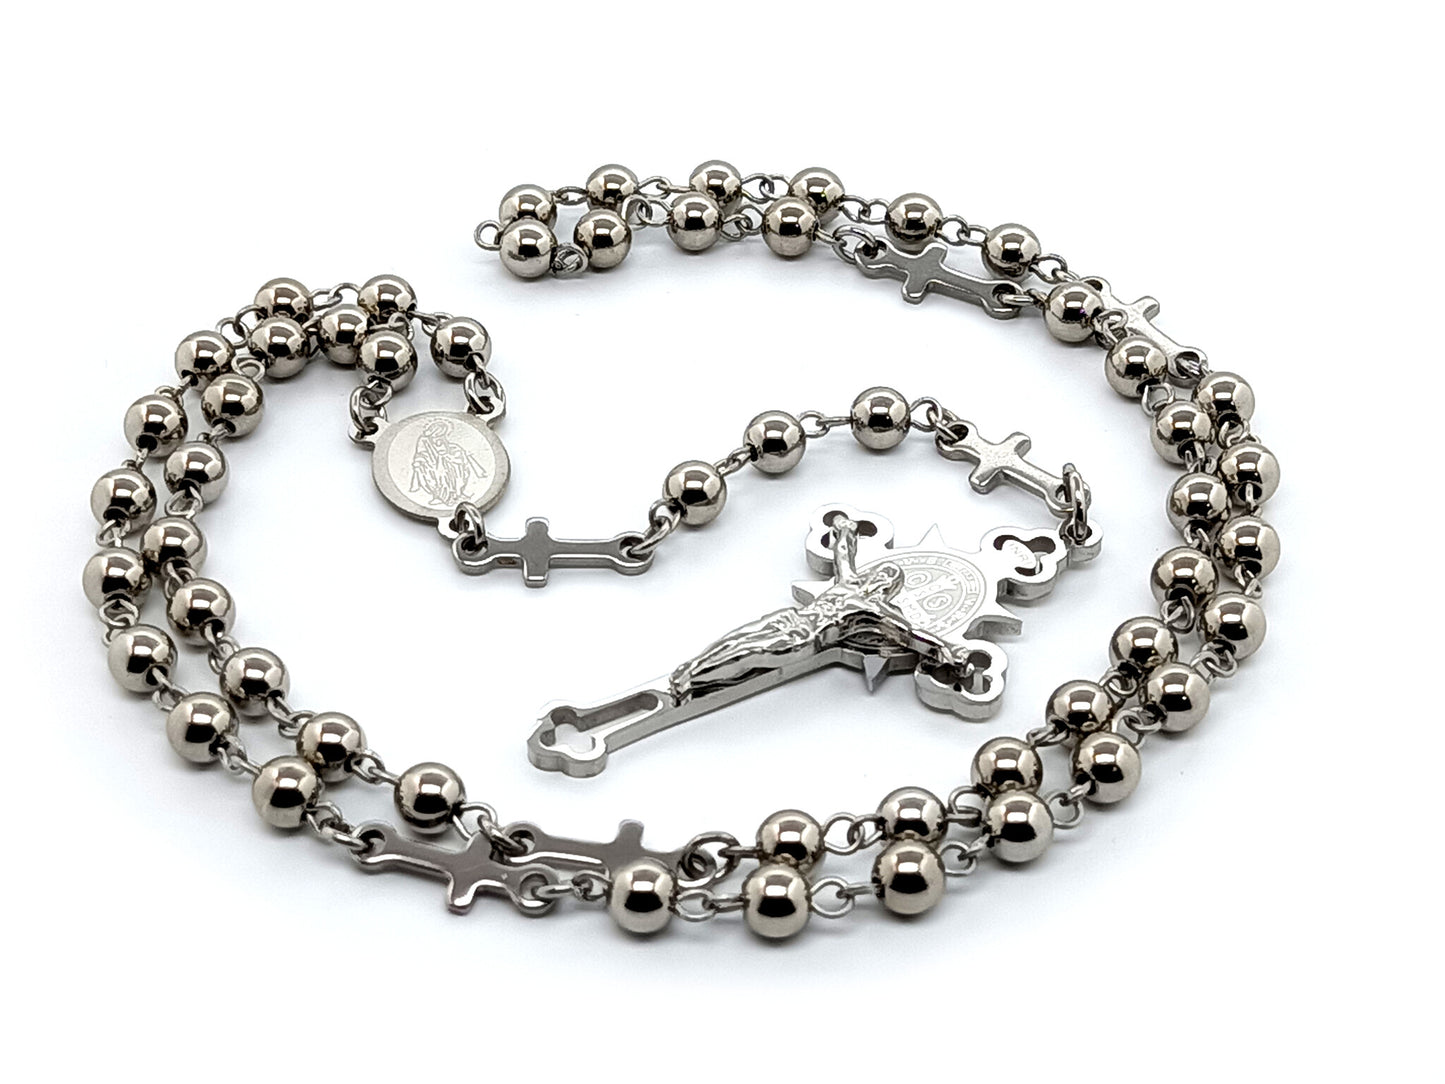 Miraculous medal and Saint Benedict unique rosary beads with stainless steel  beads and stainless steel linking cross medals.